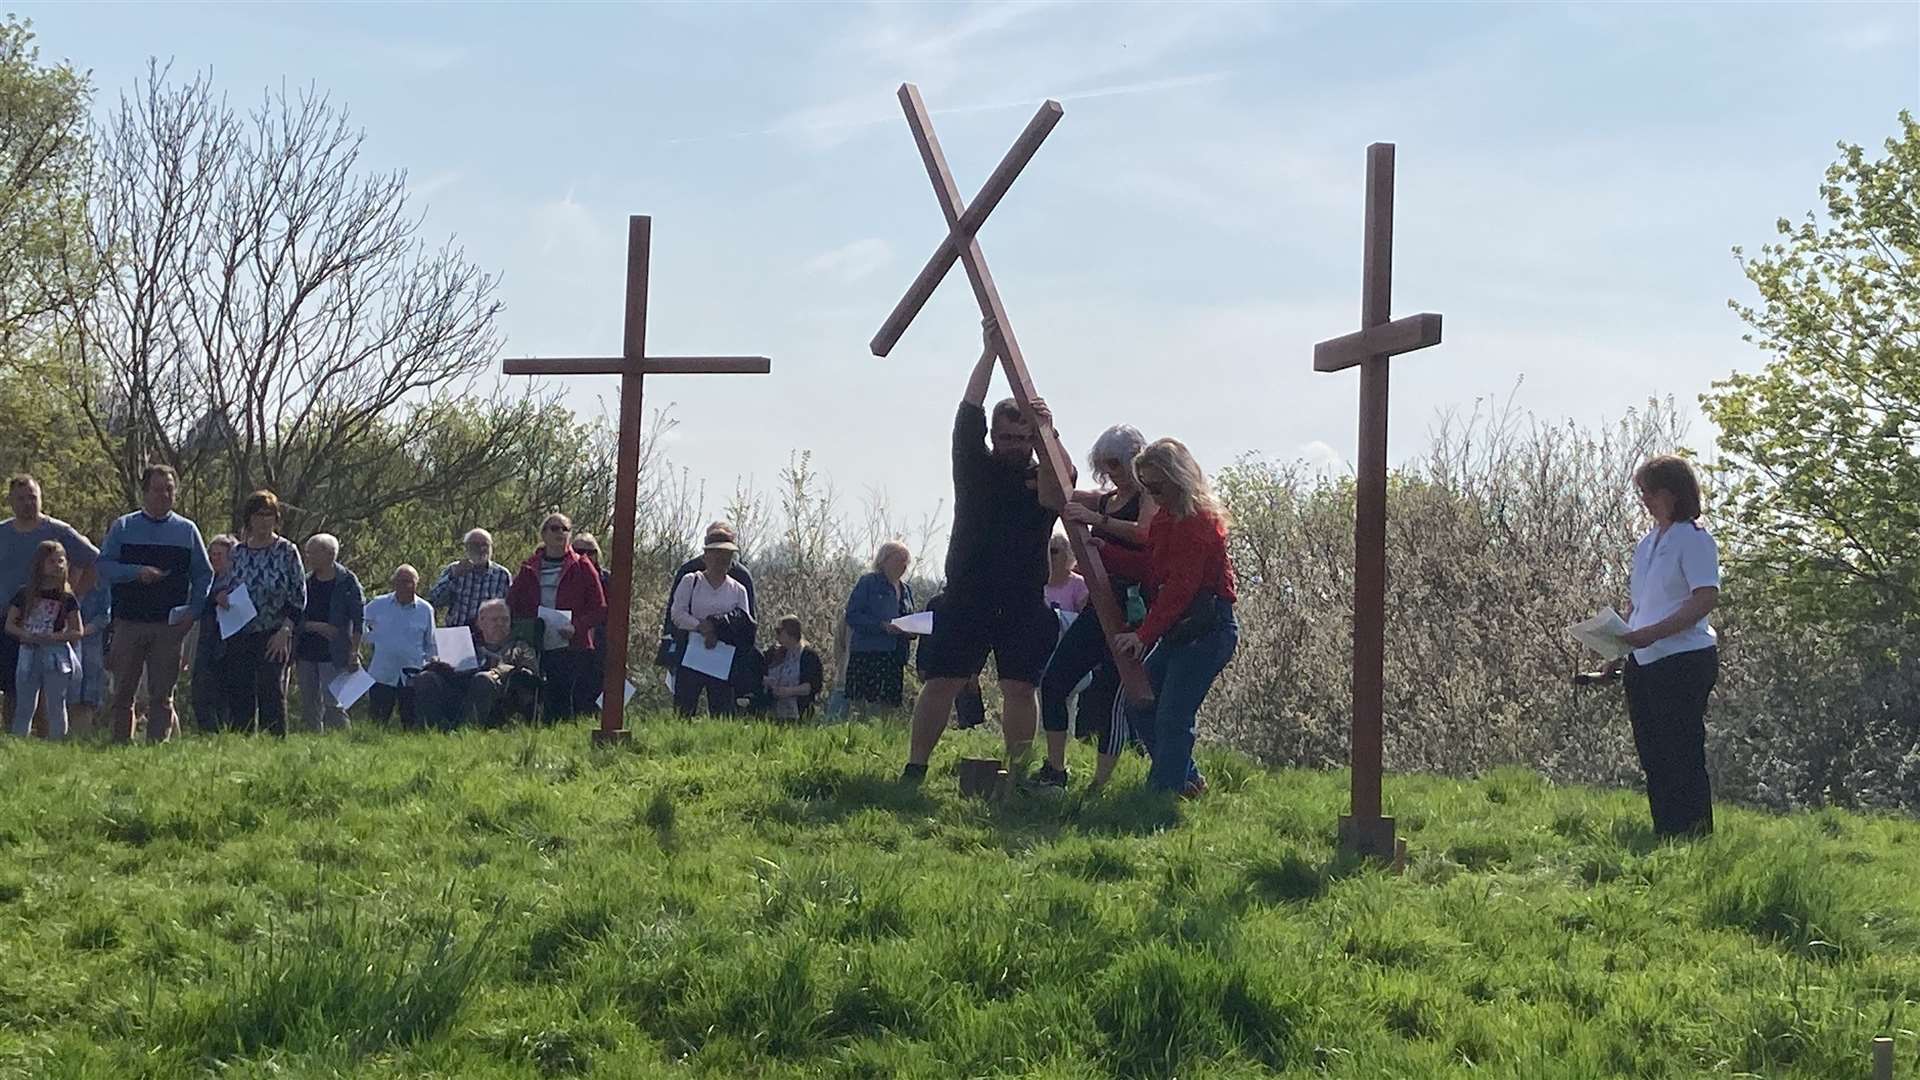 The final cross is put into position